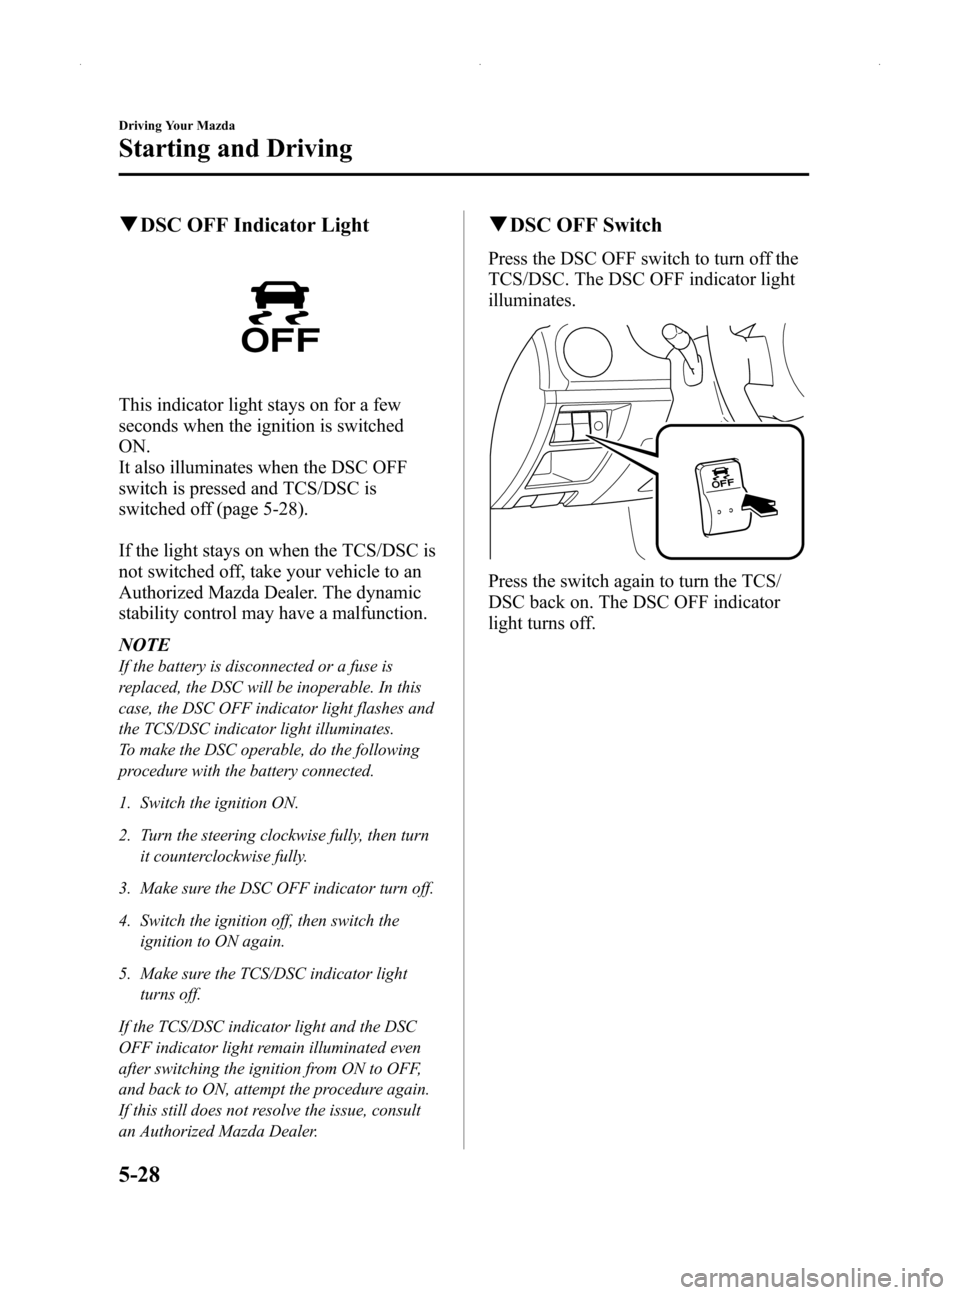 MAZDA MODEL MX-5 2014  Owners Manual (in English) Black plate (172,1)
qDSC OFF Indicator Light
This indicator light stays on for a few
seconds when the ignition is switched
ON.
It also illuminates when the DSC OFF
switch is pressed and TCS/DSC is
swi